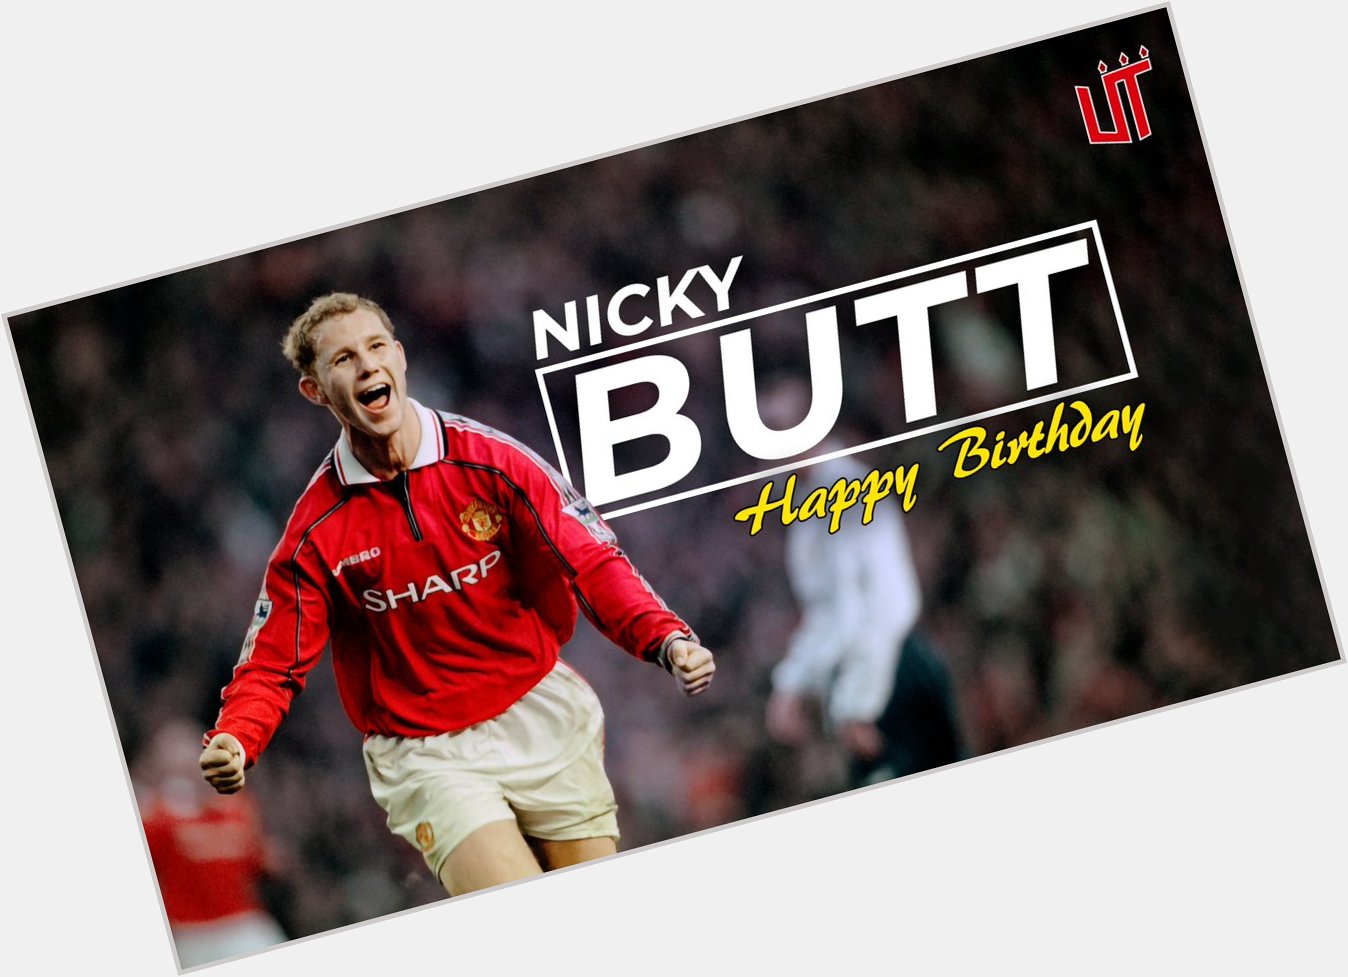 Happy birthday to former United player Nicky Butt Enjoy your day! 